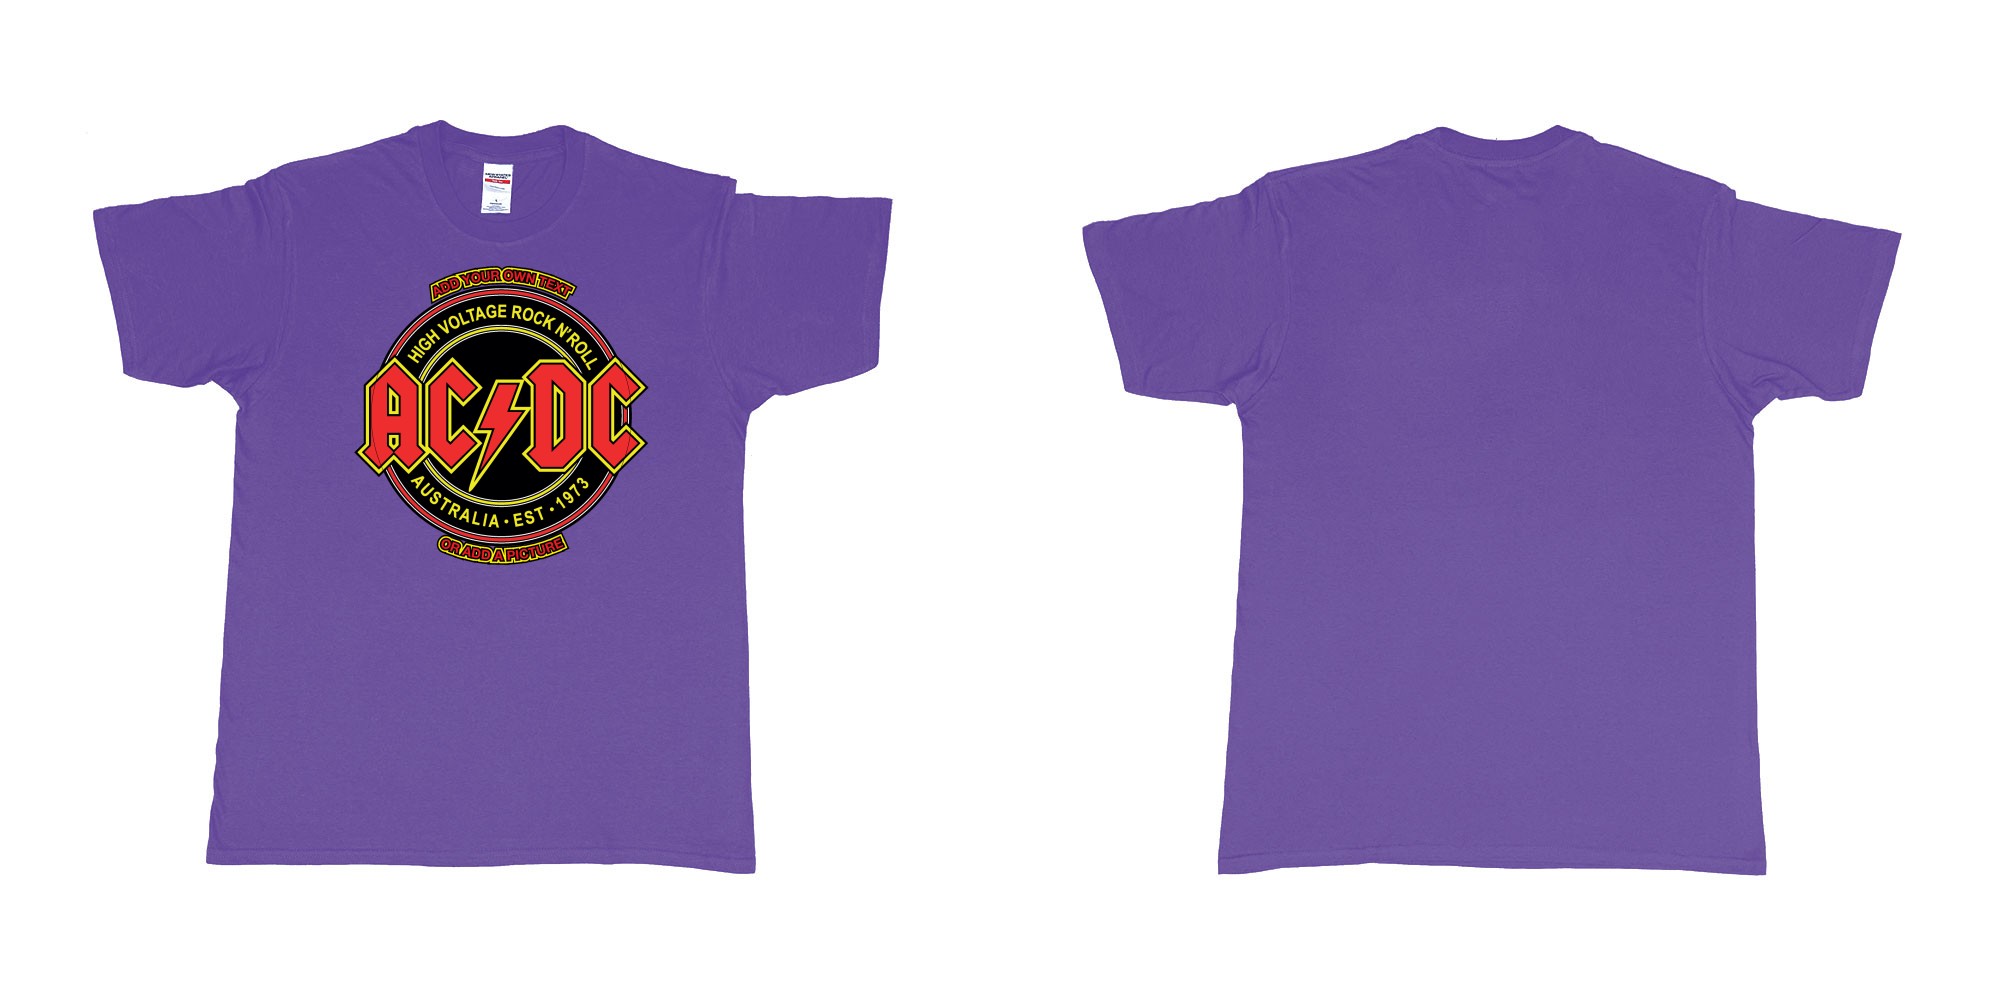 Custom tshirt design ac dc high voltage rock n roll australia est 1973 tshirt in fabric color purple choice your own text made in Bali by The Pirate Way